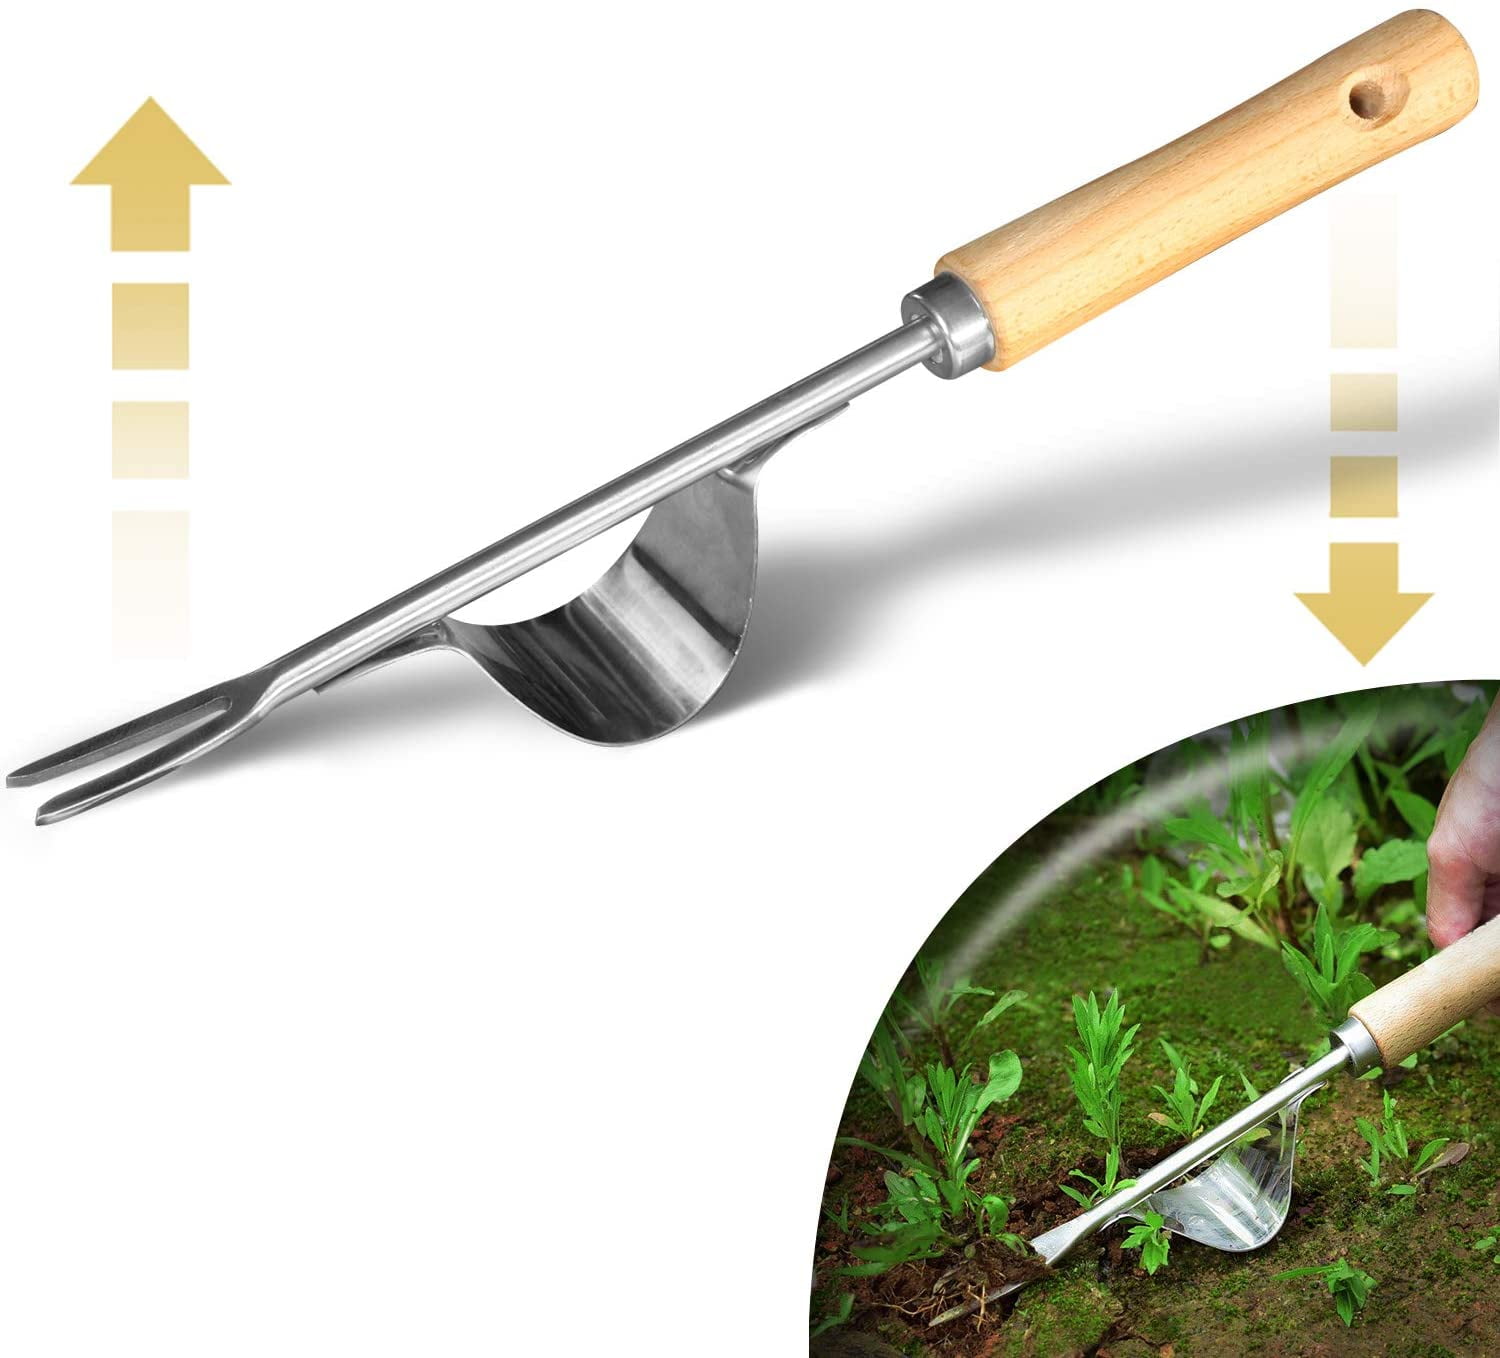 Weeding Tool, Heavy-Duty Weeder, Leverage Design Weed Removal and